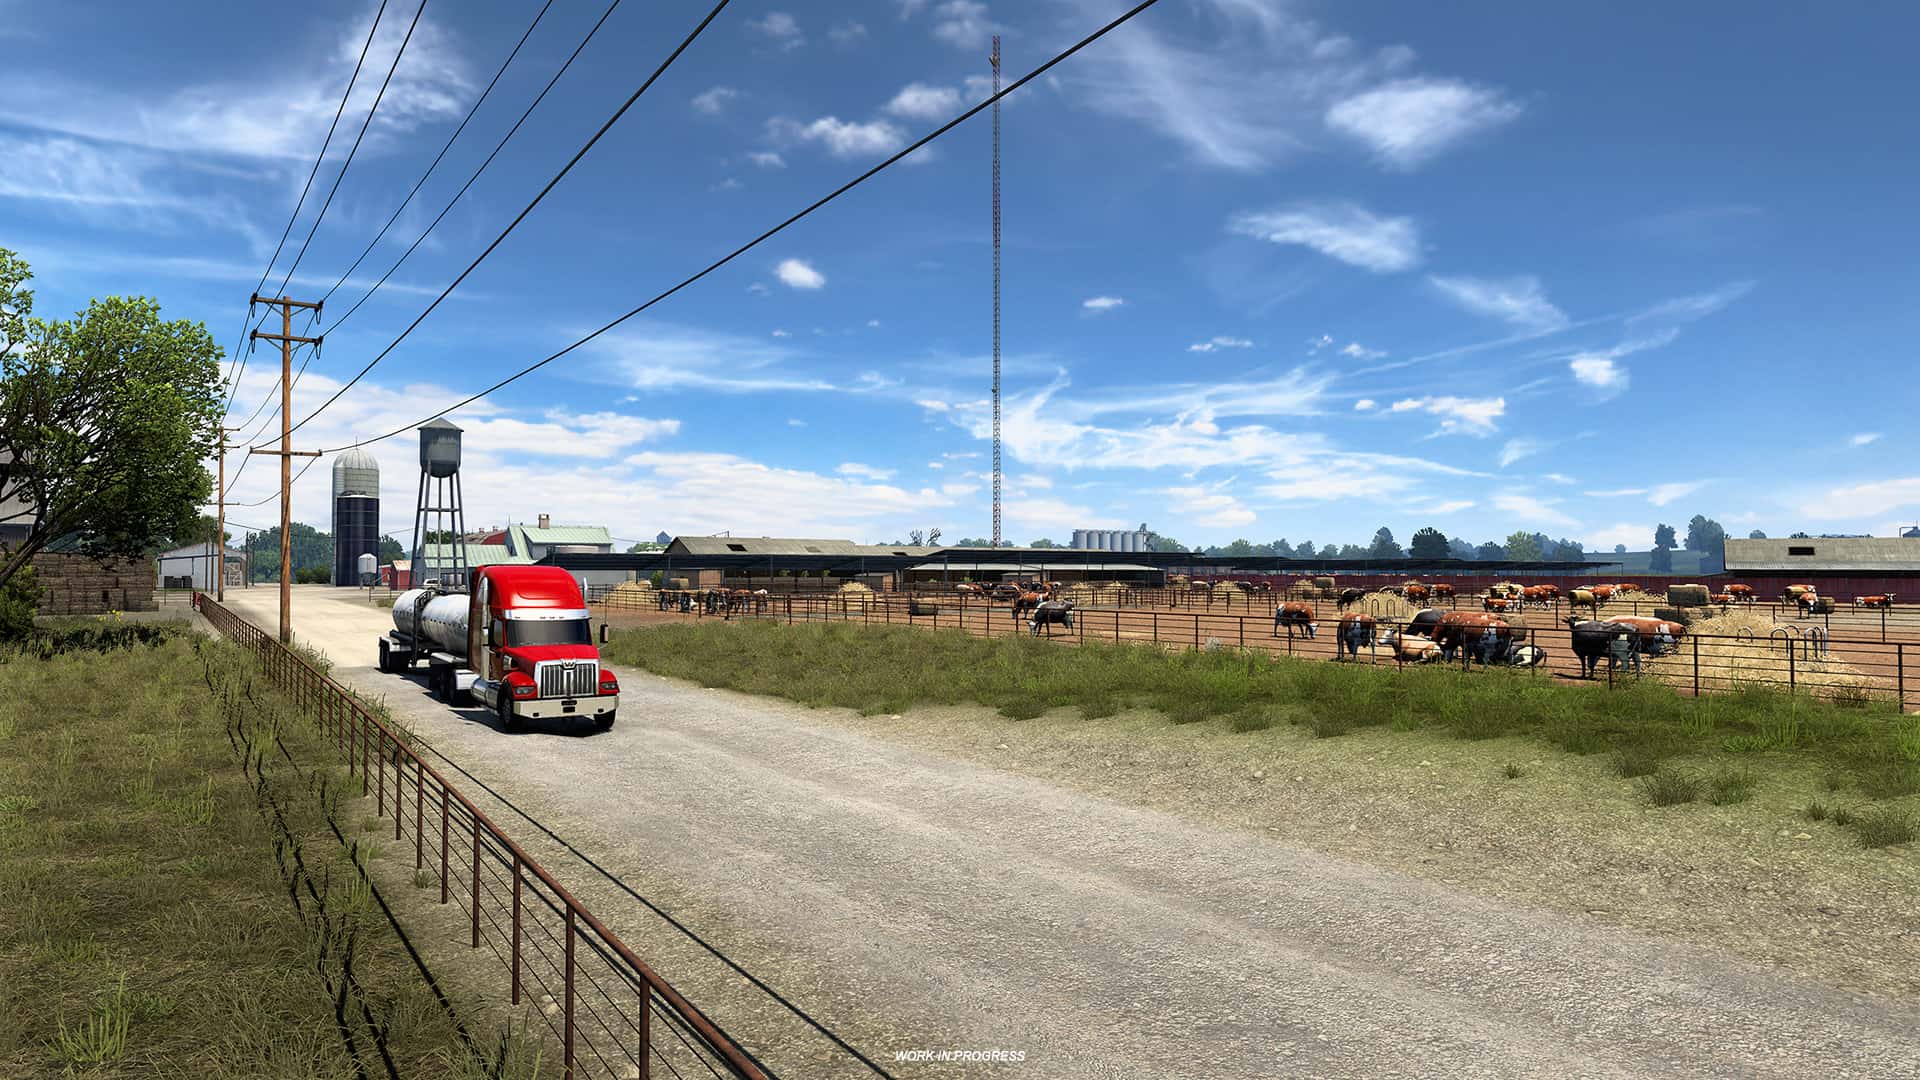 American Truck Simulator is going agricultural with its upcoming Texas DLC